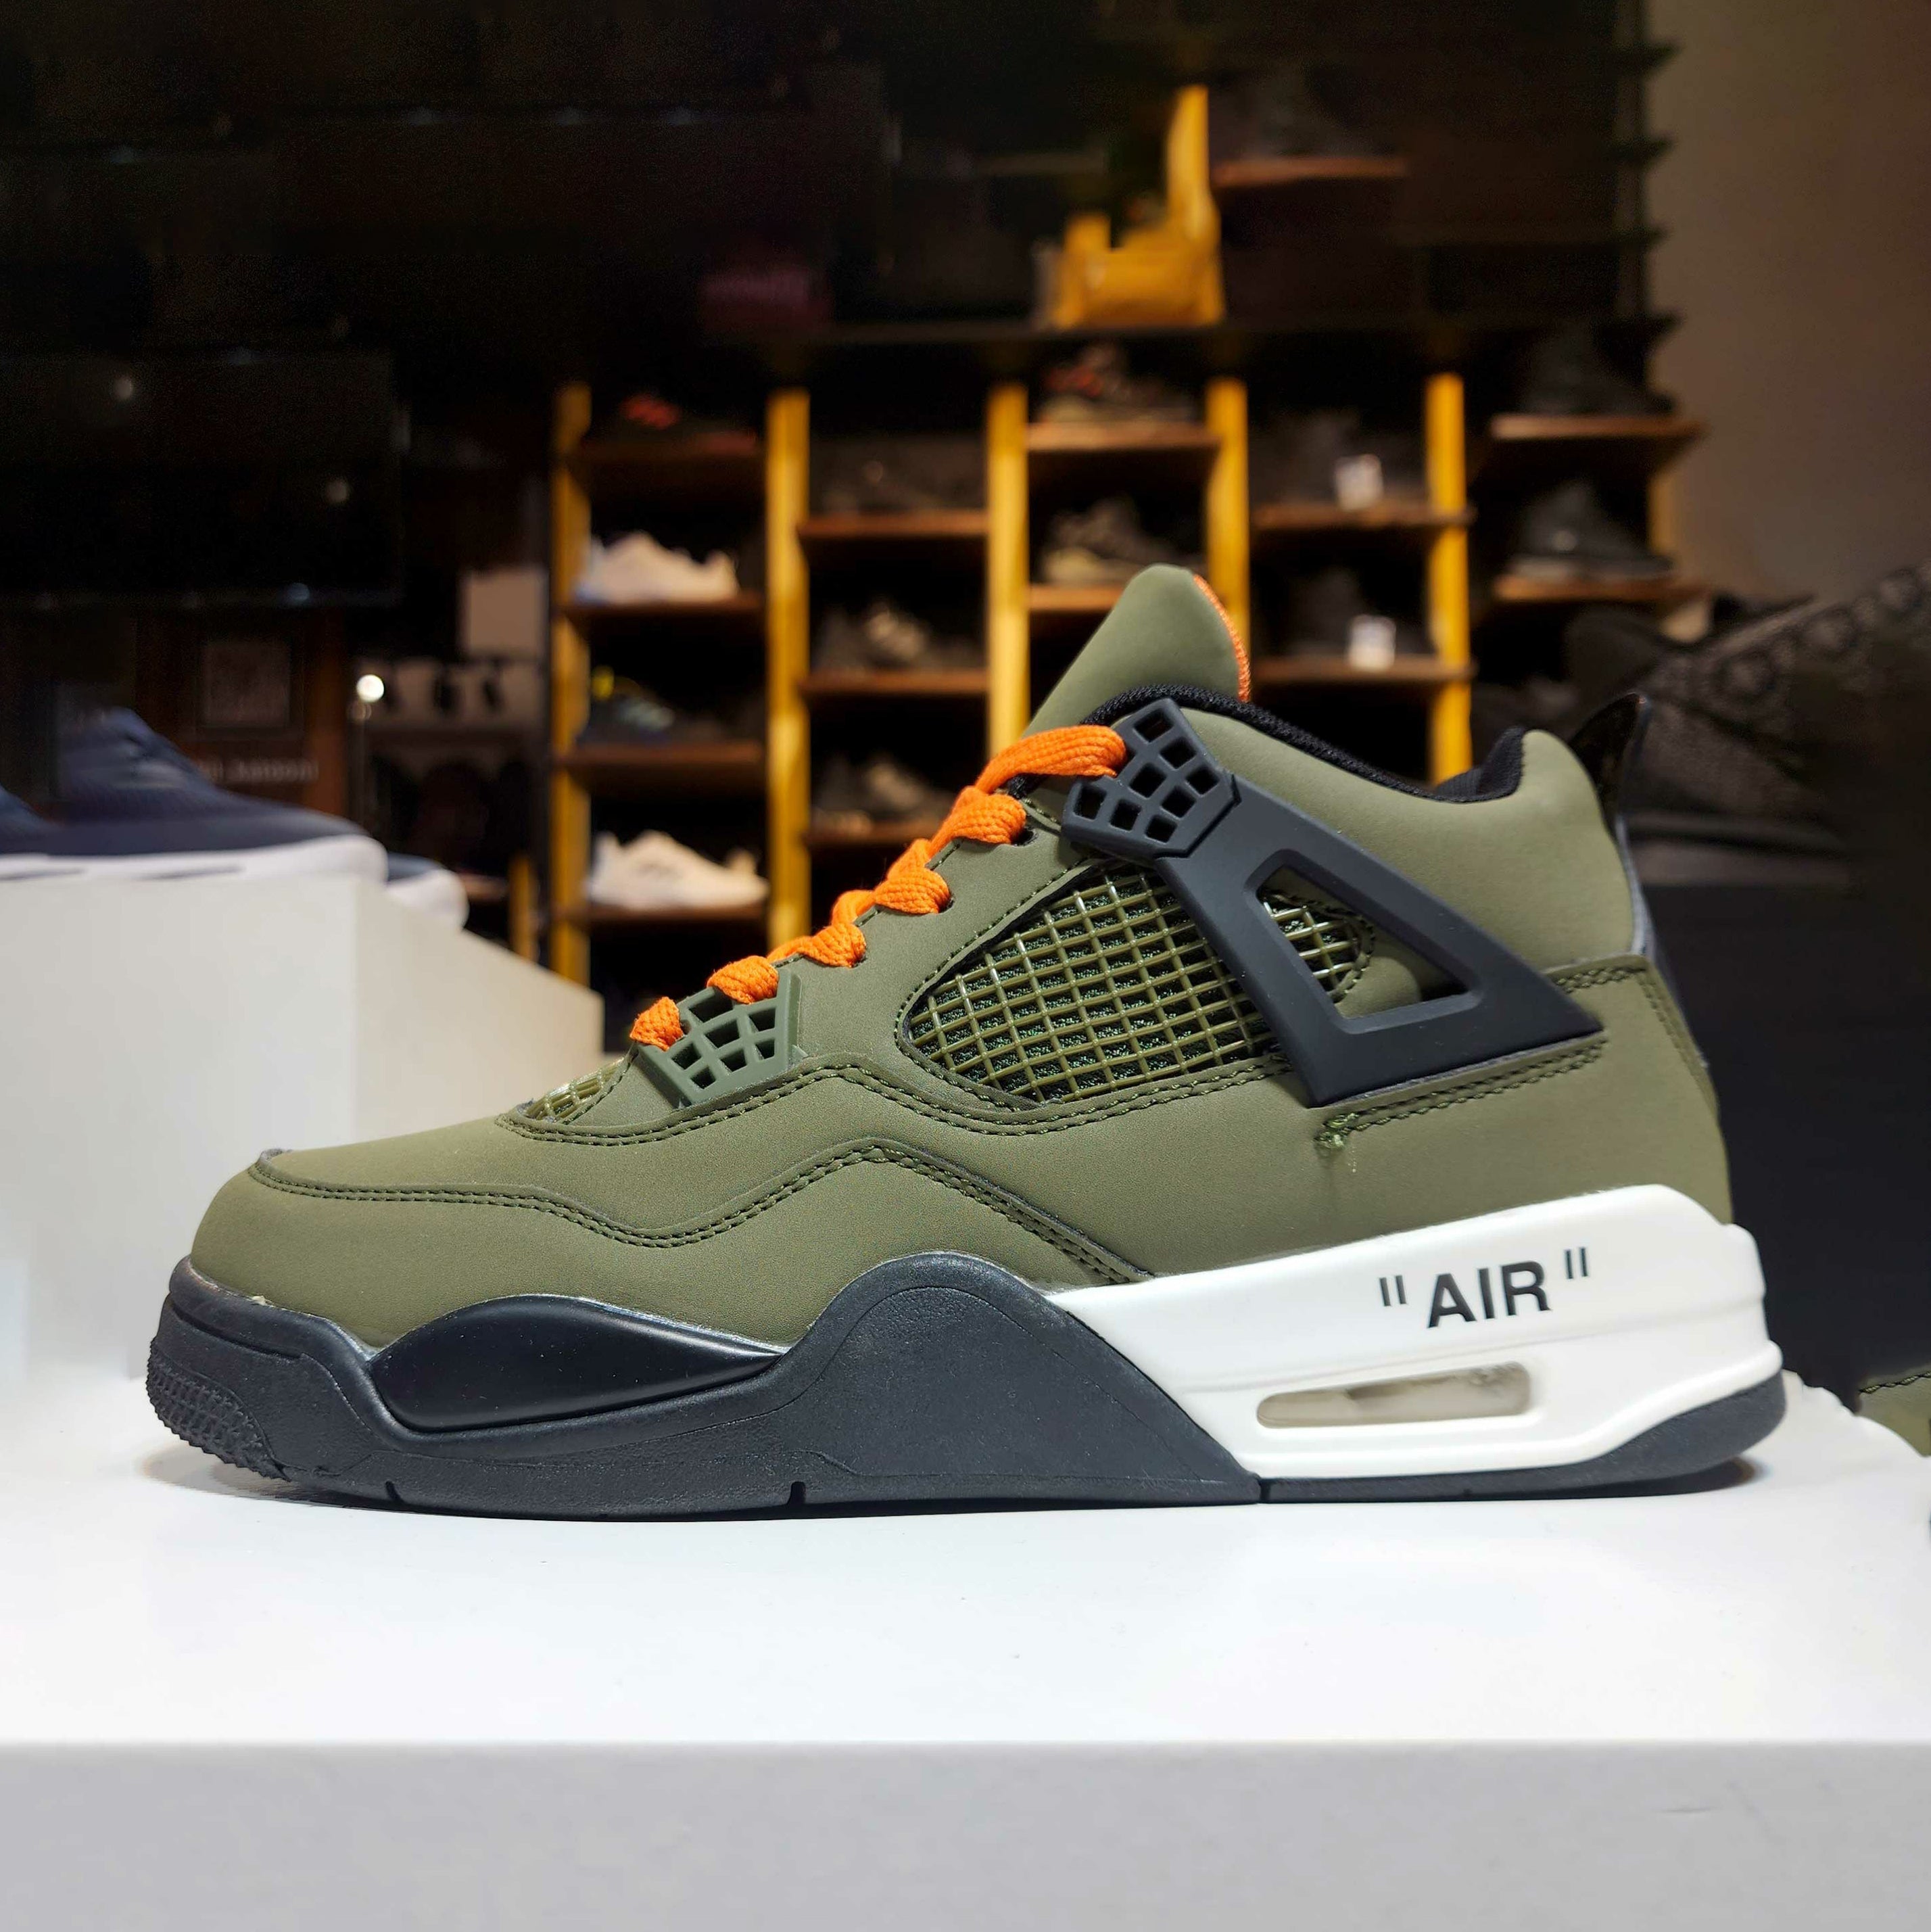 24015-Olive High-neck sneakers for Men